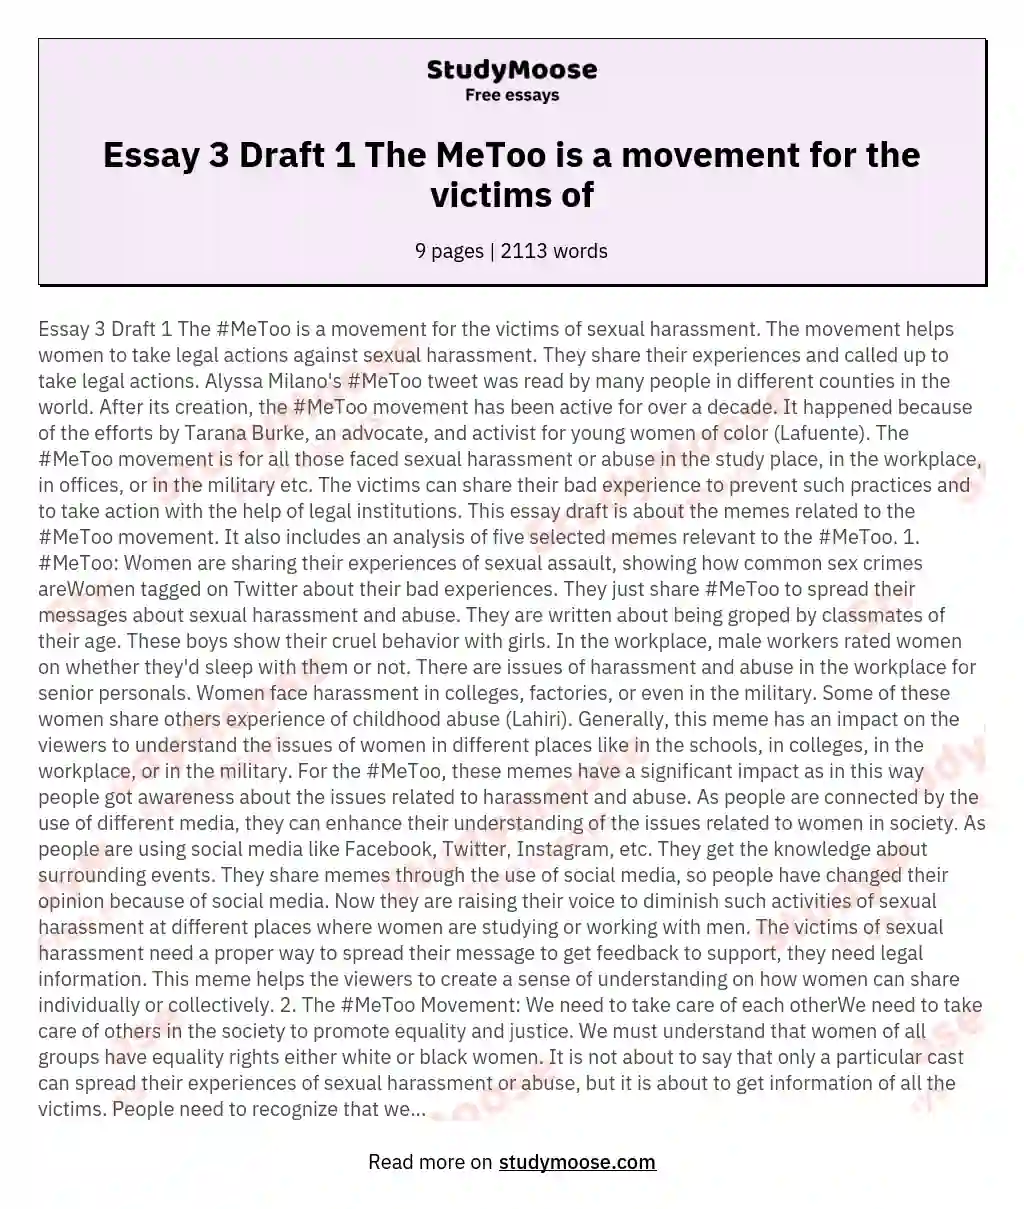 Essay 3 Draft 1 The MeToo is a movement for the victims of